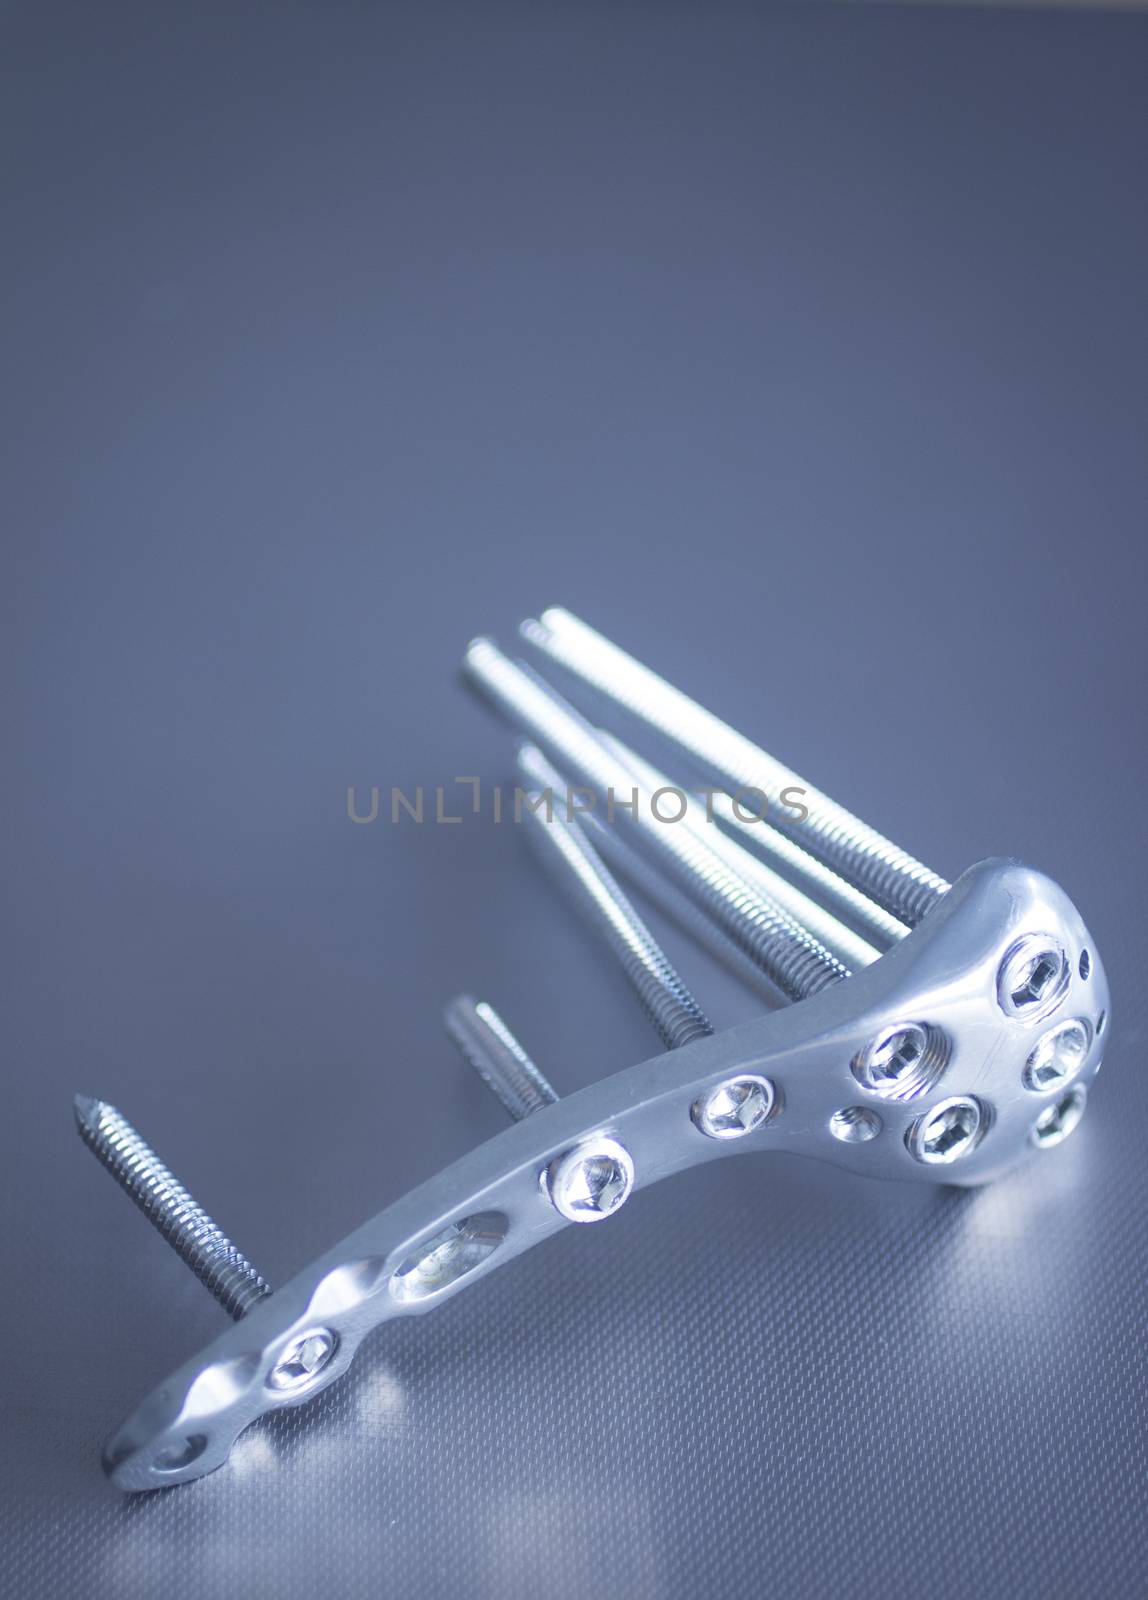 Trauma and orthopedic surgery metal implant with screws with reflection and bokeh light effect. Still life color digital photo with copy space. 